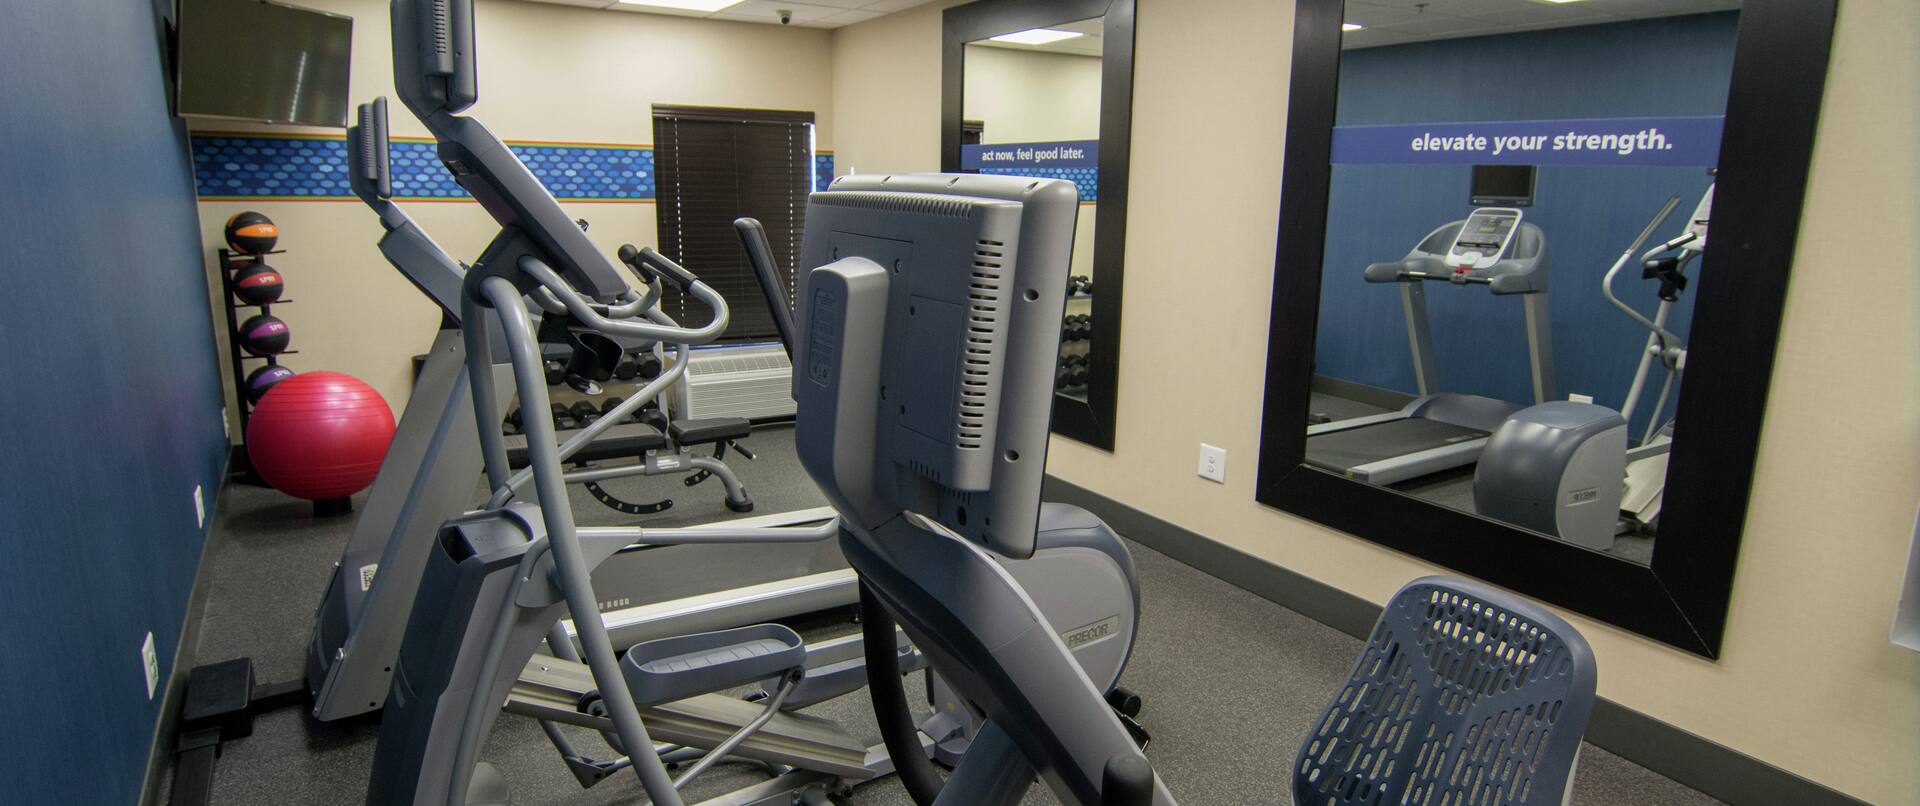 Fitness Center with Elliptical Machines, Treadmills, Mirrors, and Room Technology